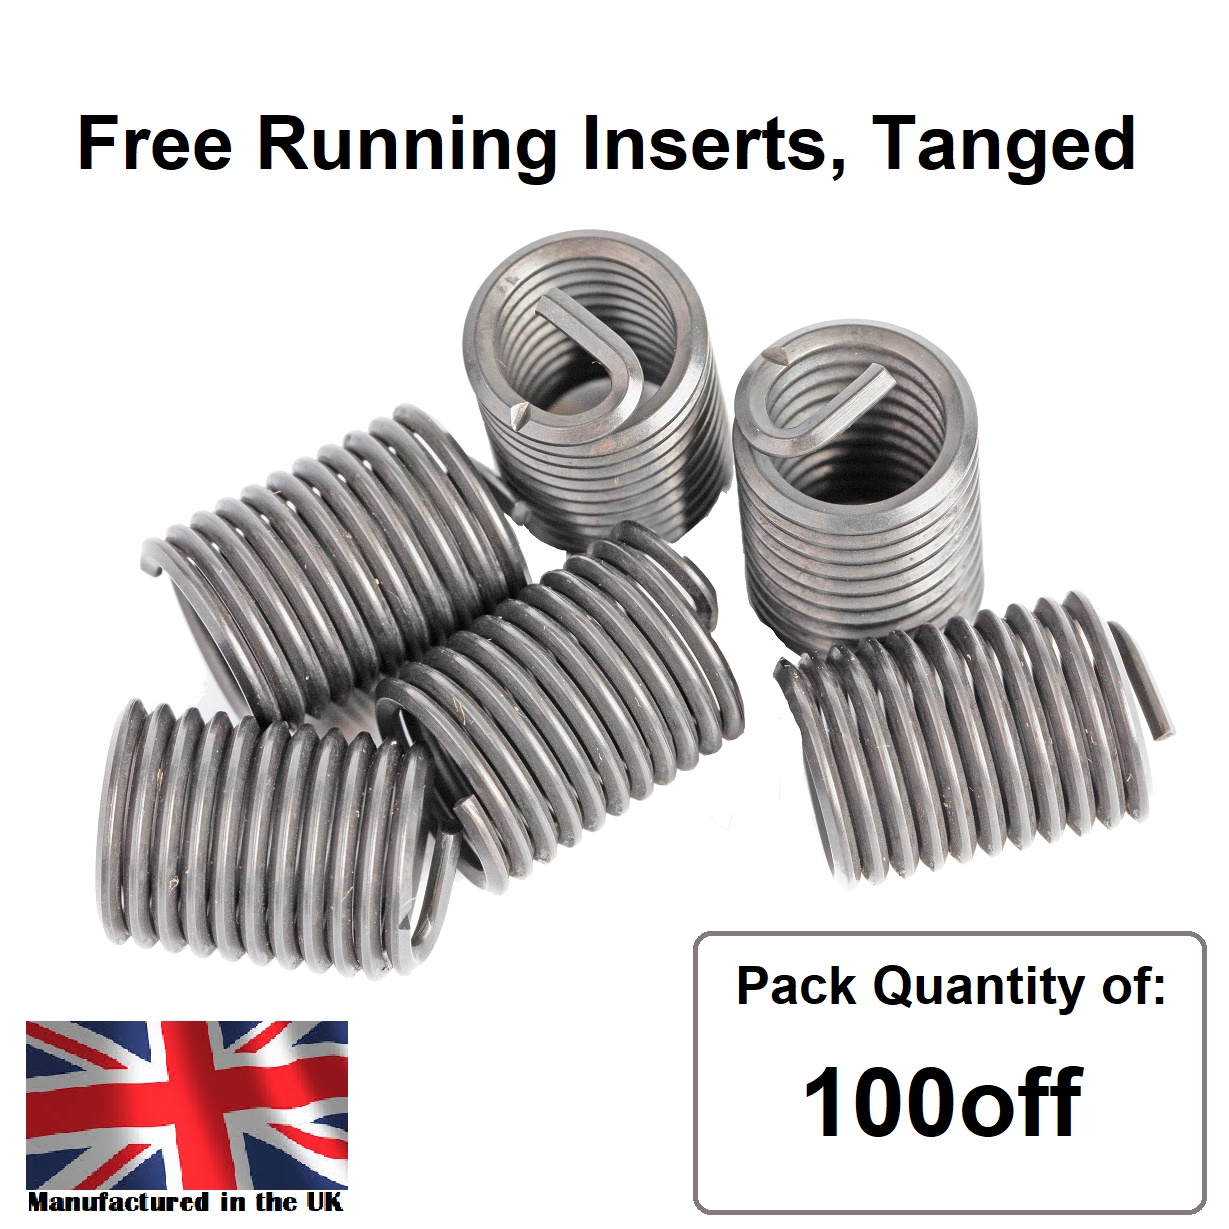 M2 x 0.4 x 1.5D Metric Coarse, Free Running, Tanged, Wire Thread Repair Insert, 304/A2 Stainless (Pack 100)